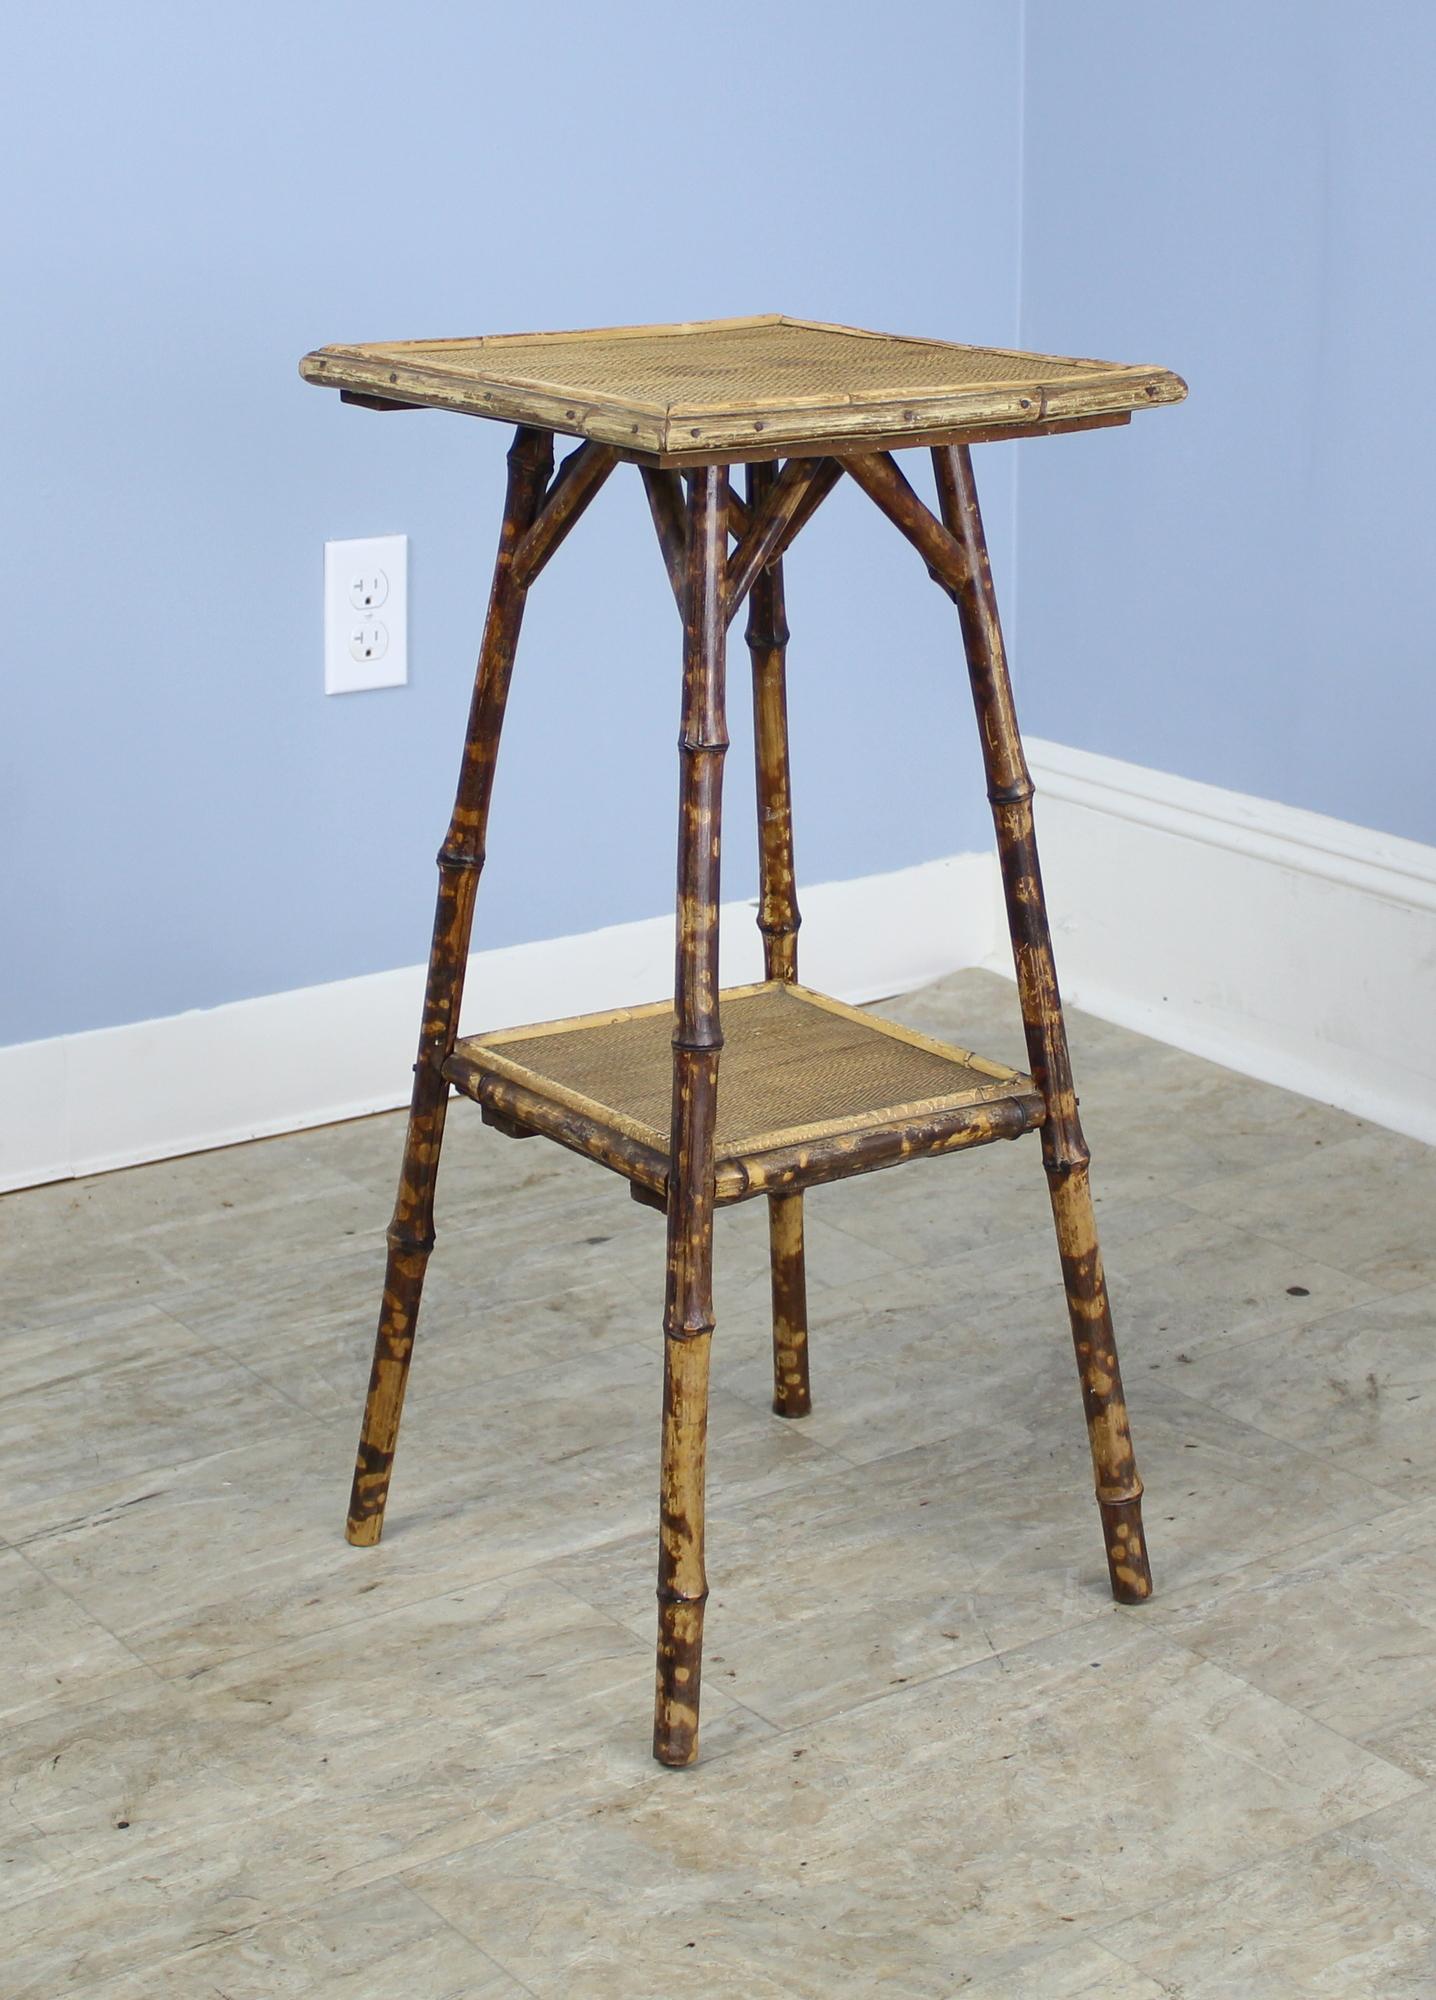 A very small bamboo side table, mildly distressed with wonderful antique color and patina. The painted legs still retain their vibrancy. Sweet!